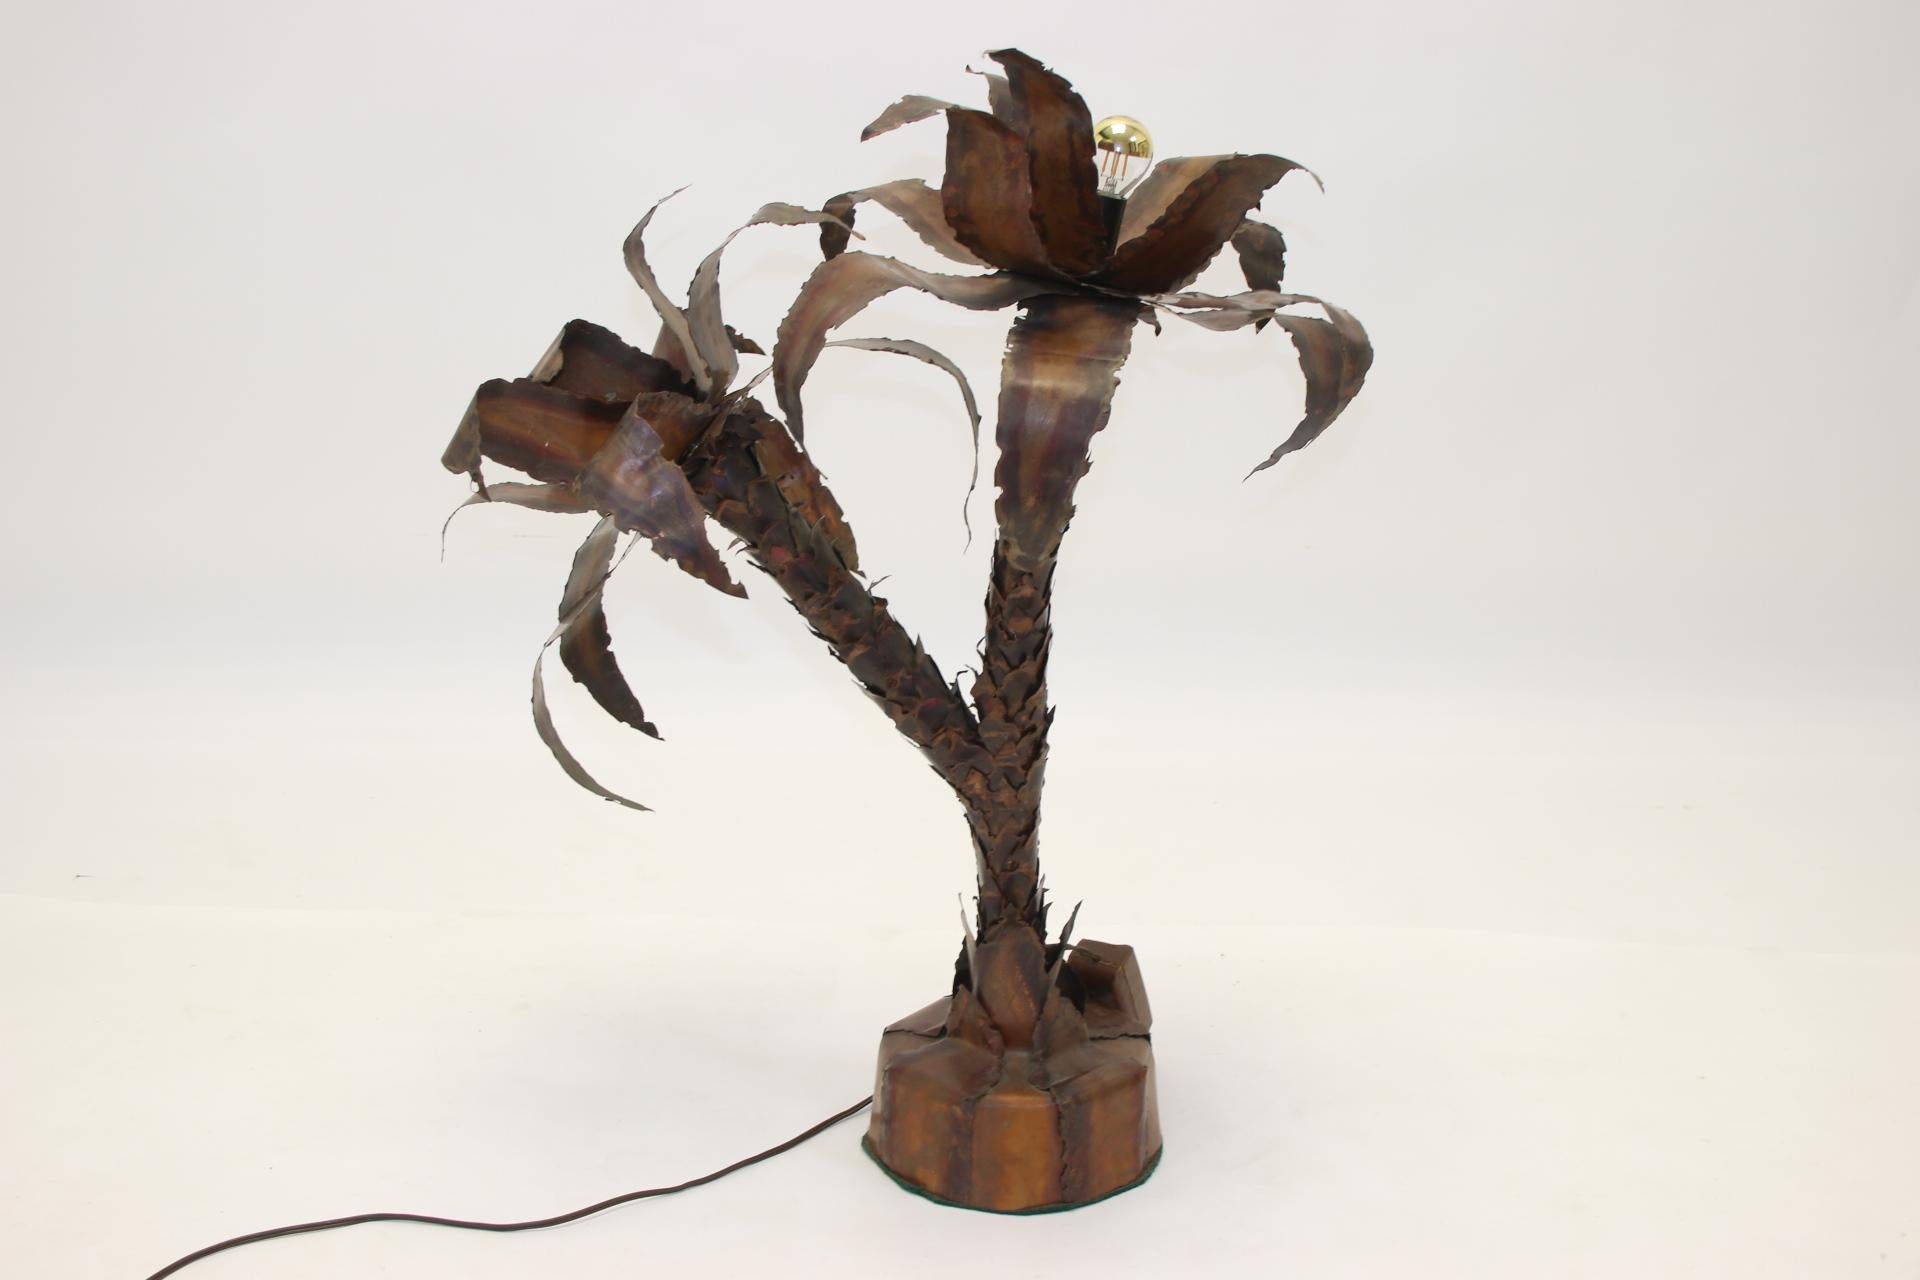 Very special and stylish copper palm tree lamp.

Designed by Maison Jansen, 1970 - 1980.

The style is both Hollywood Regency and Brutalist.

The copper leaves are made one by one by hand and fixed on the frame.

Can be used as a stylish